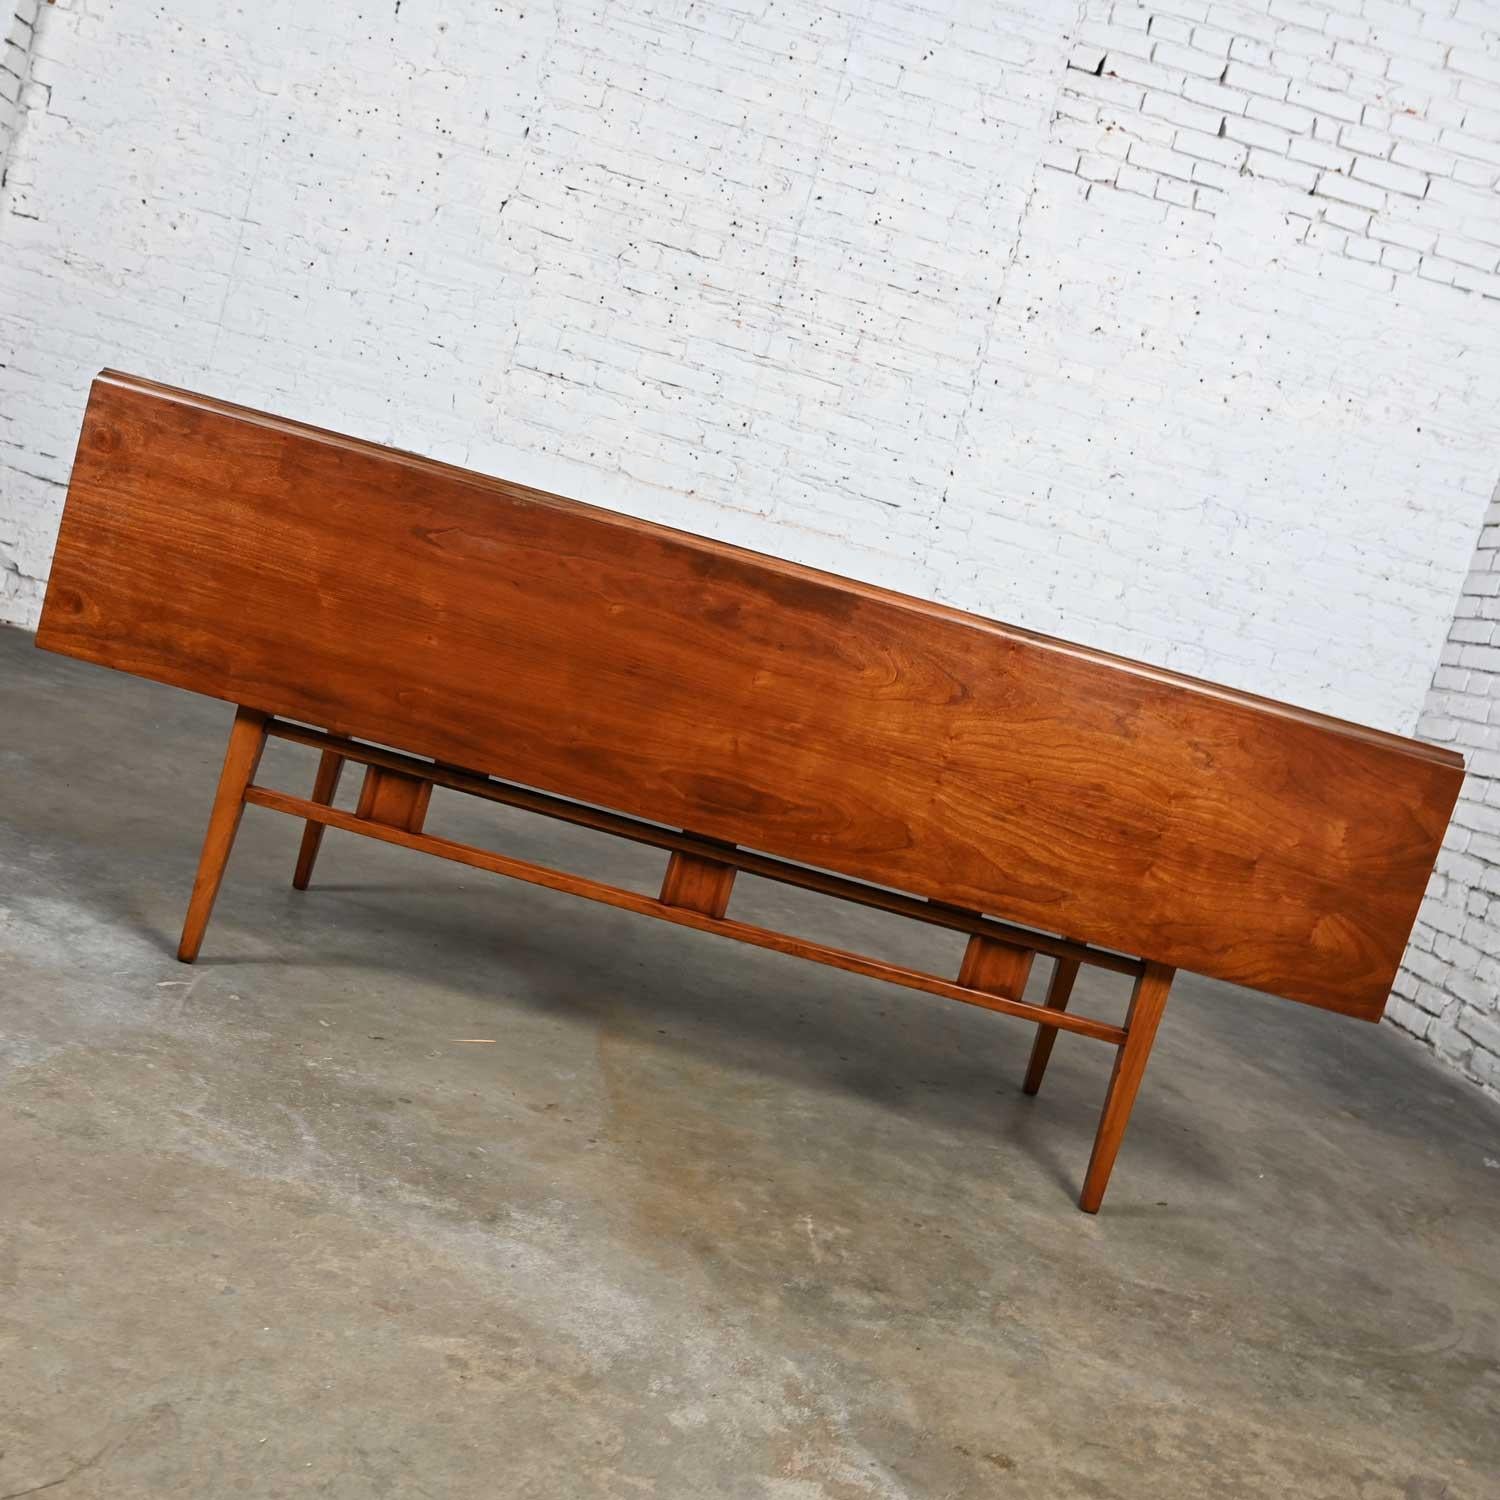 Wonderful vintage Mid-Century Modern walnut drop leaf dining table attributed to Statesville chair Company. This piece has been attributed based upon archived research including online sources, vintage documentation and catalogs, designer